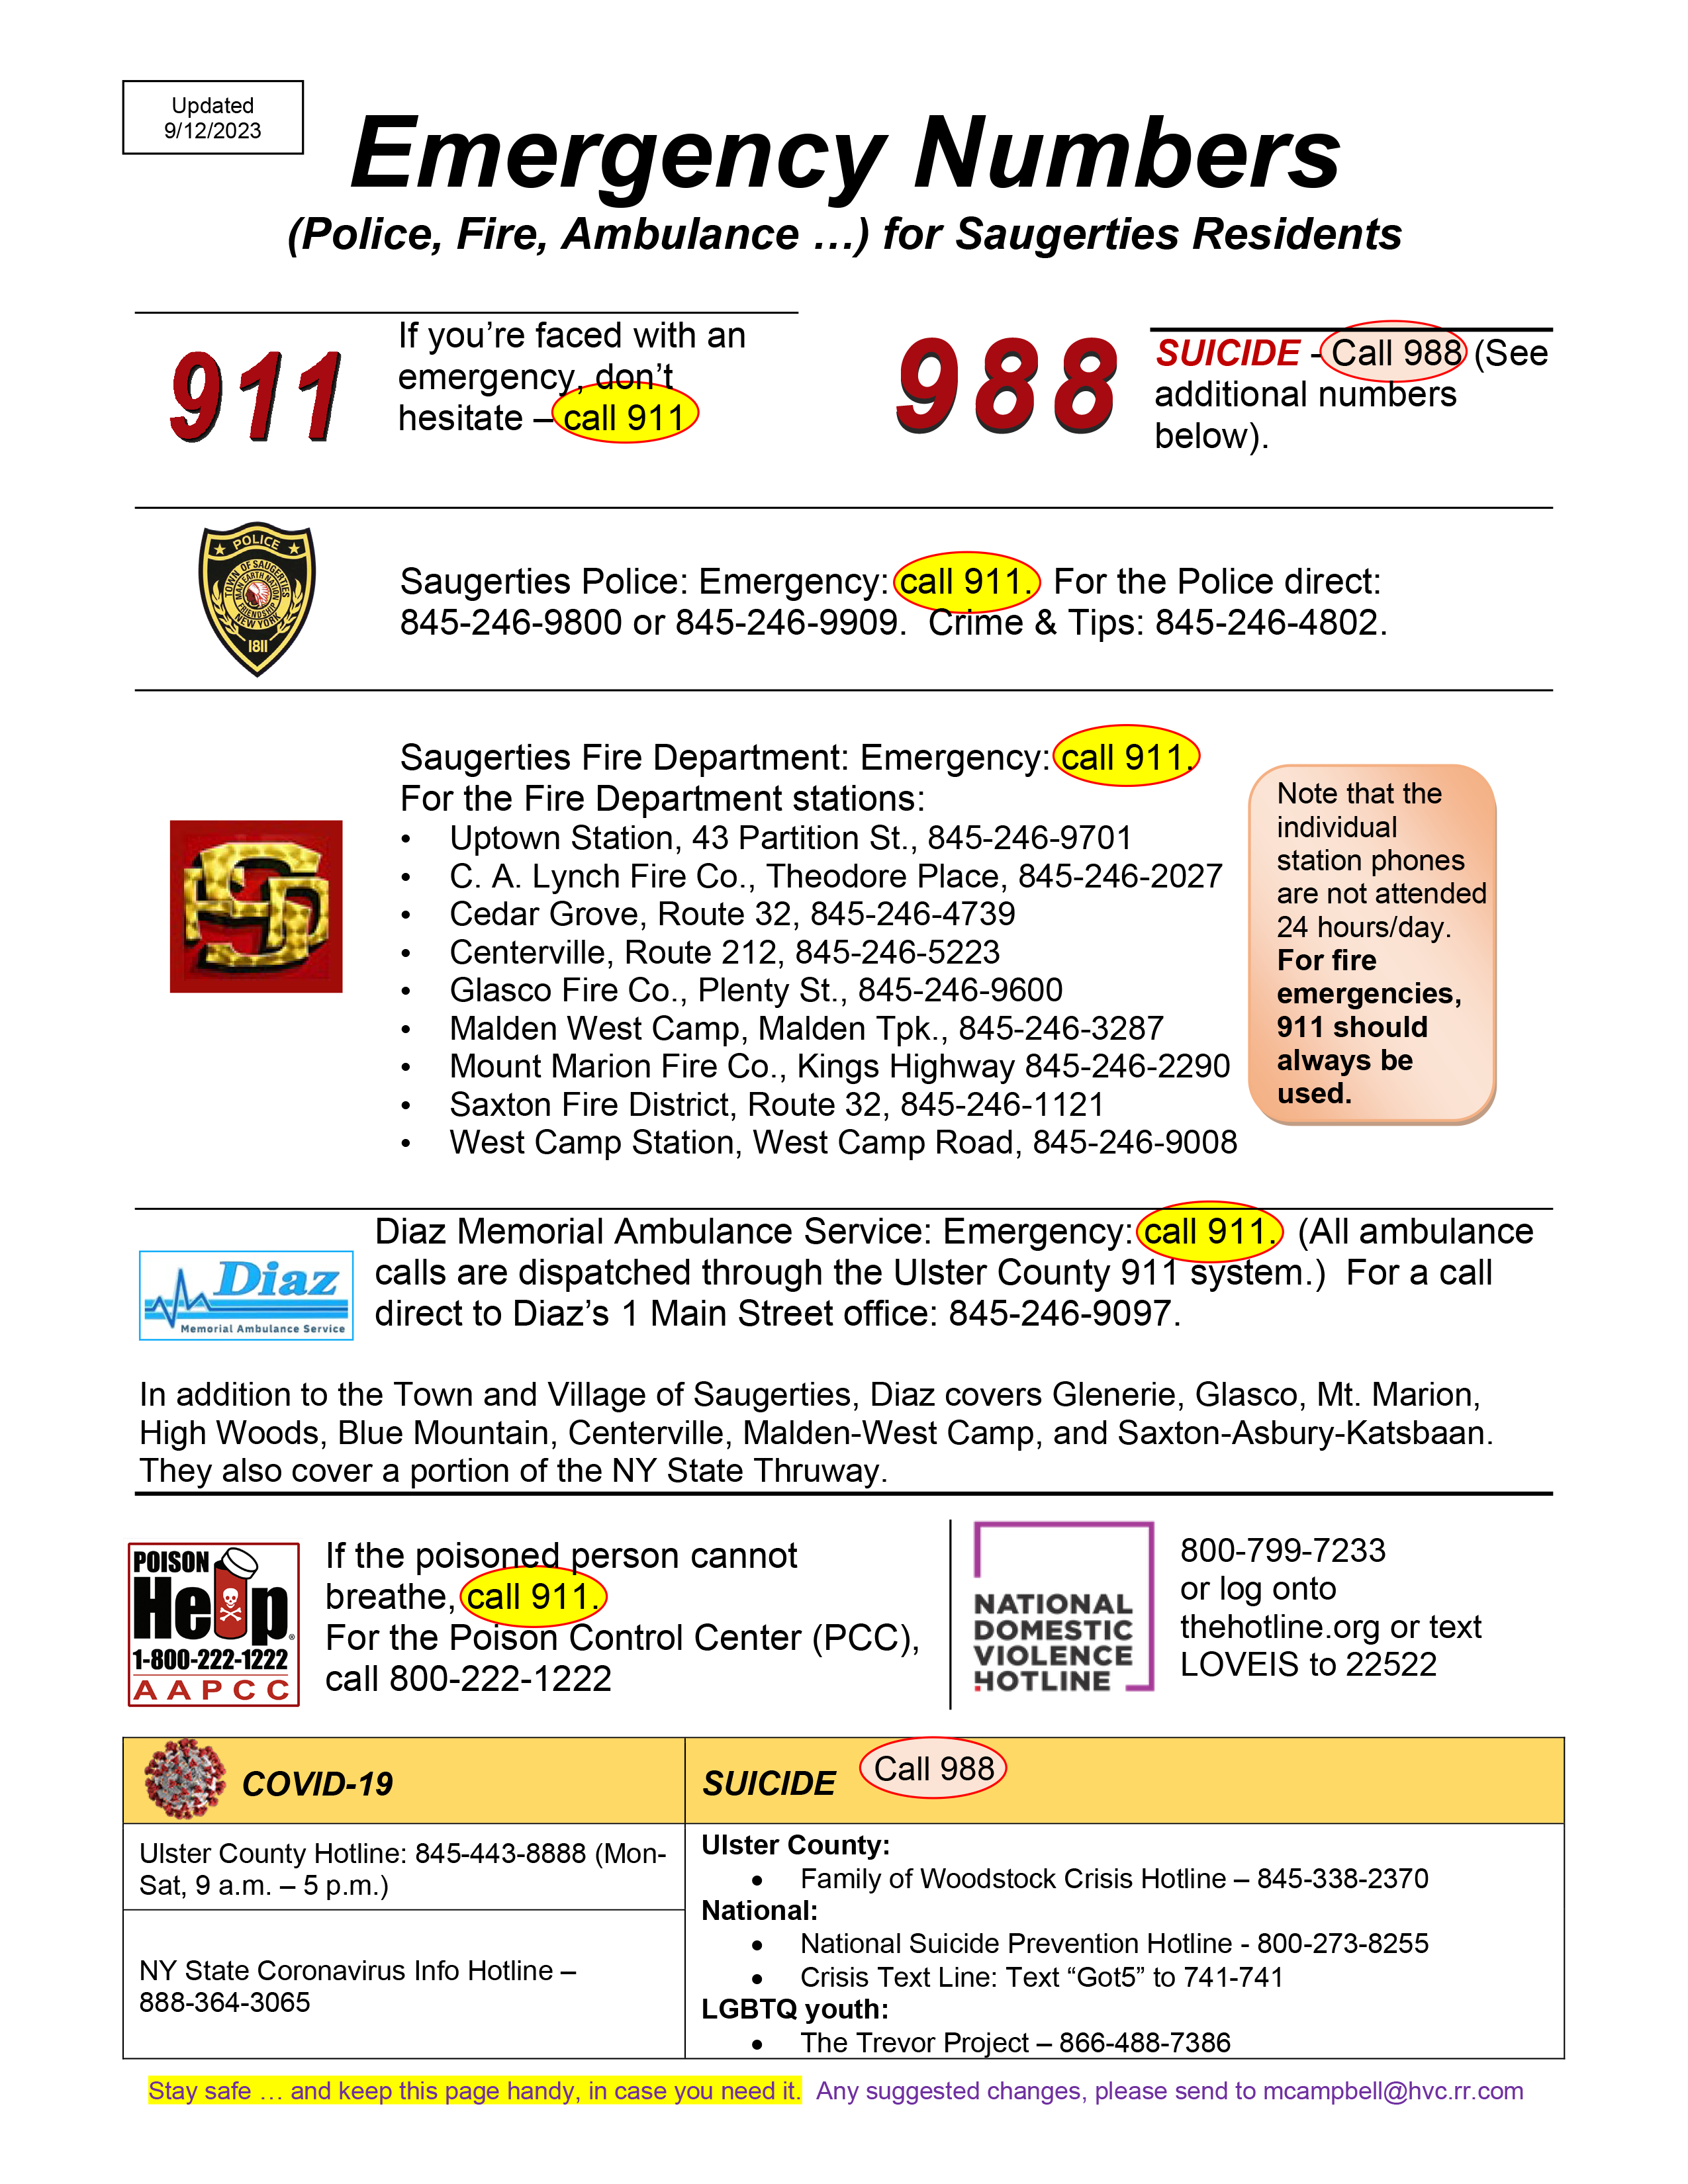 Image of the 1-page Emergency Numbers PDF